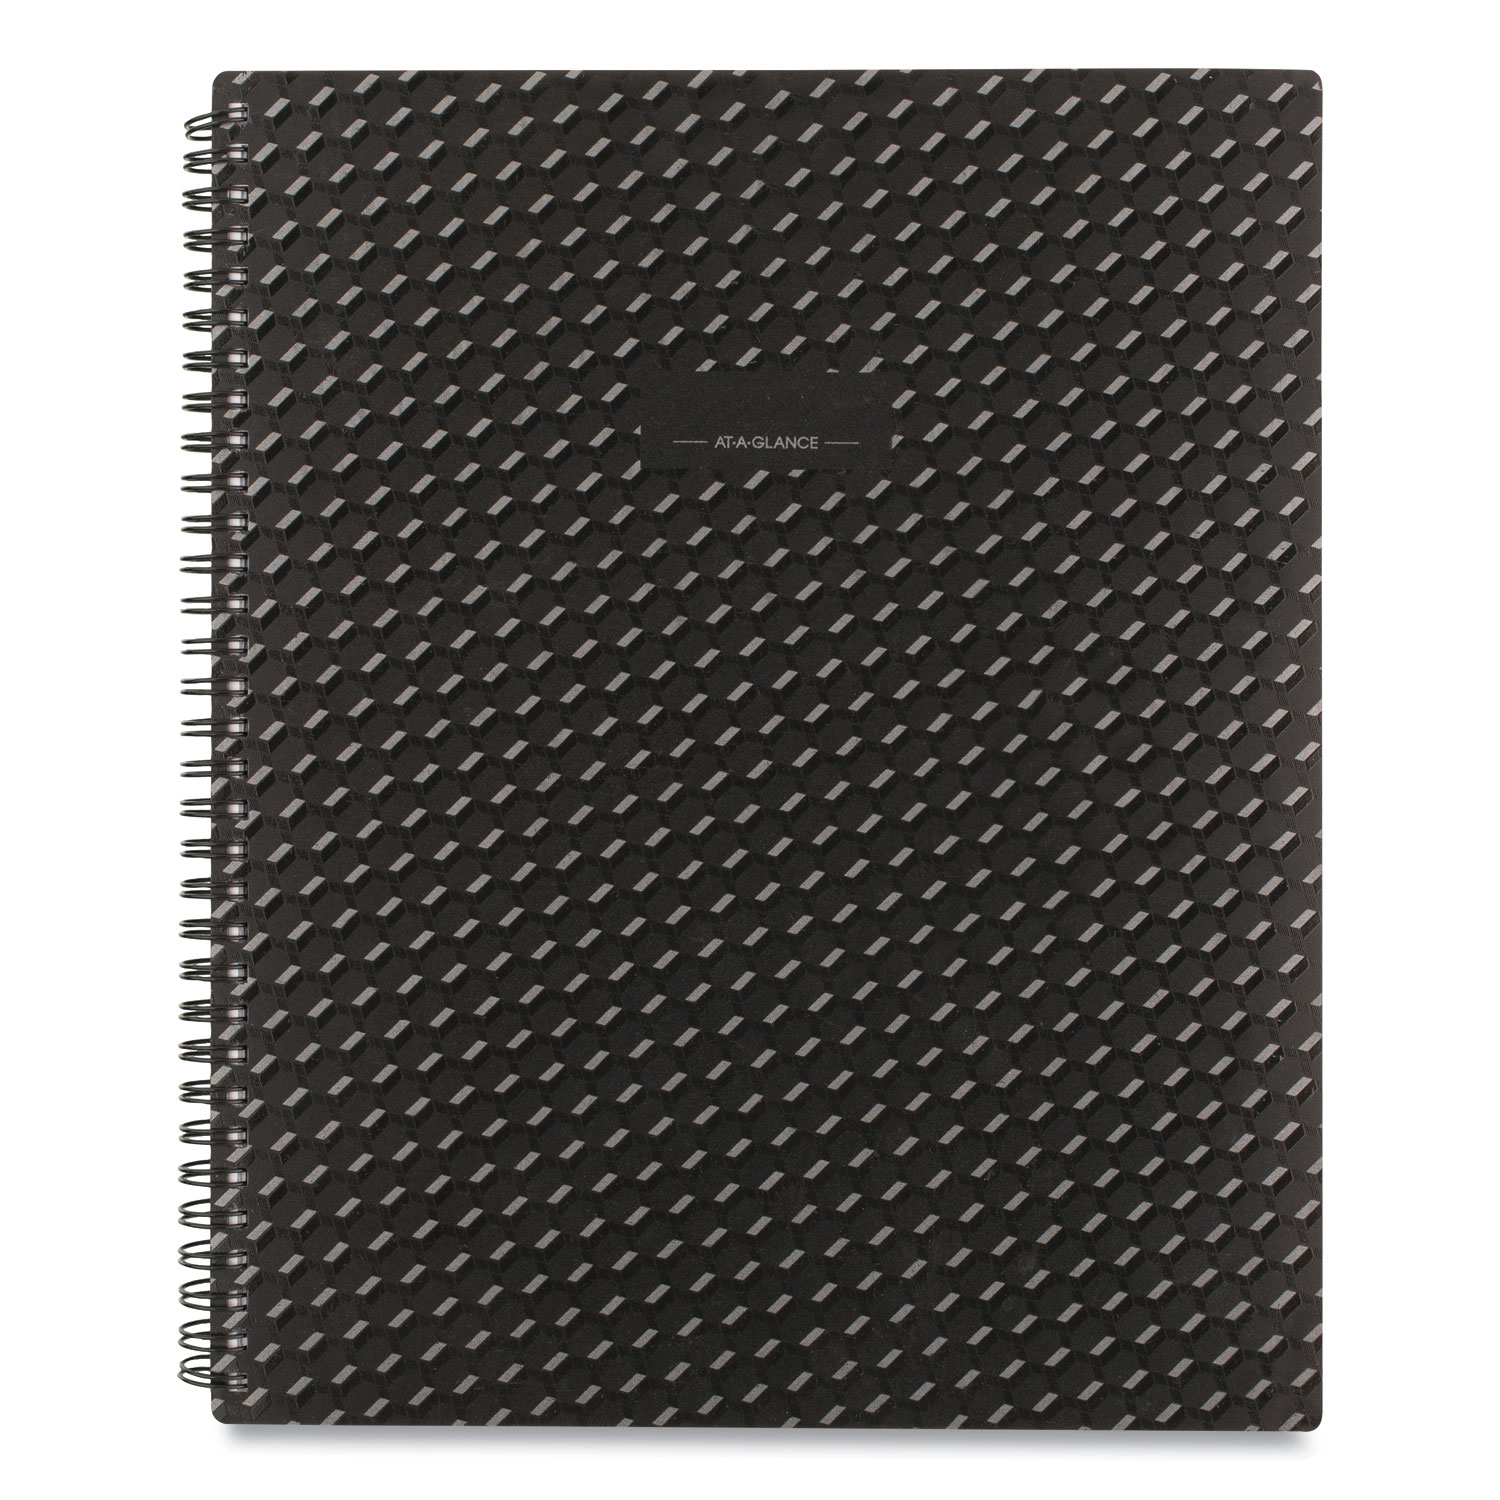  AT-A-GLANCE 75950P05 Elevation Poly Weekly/Monthly Planner, 11 x 8.5, Black, 2021 (AAG75950P05) 